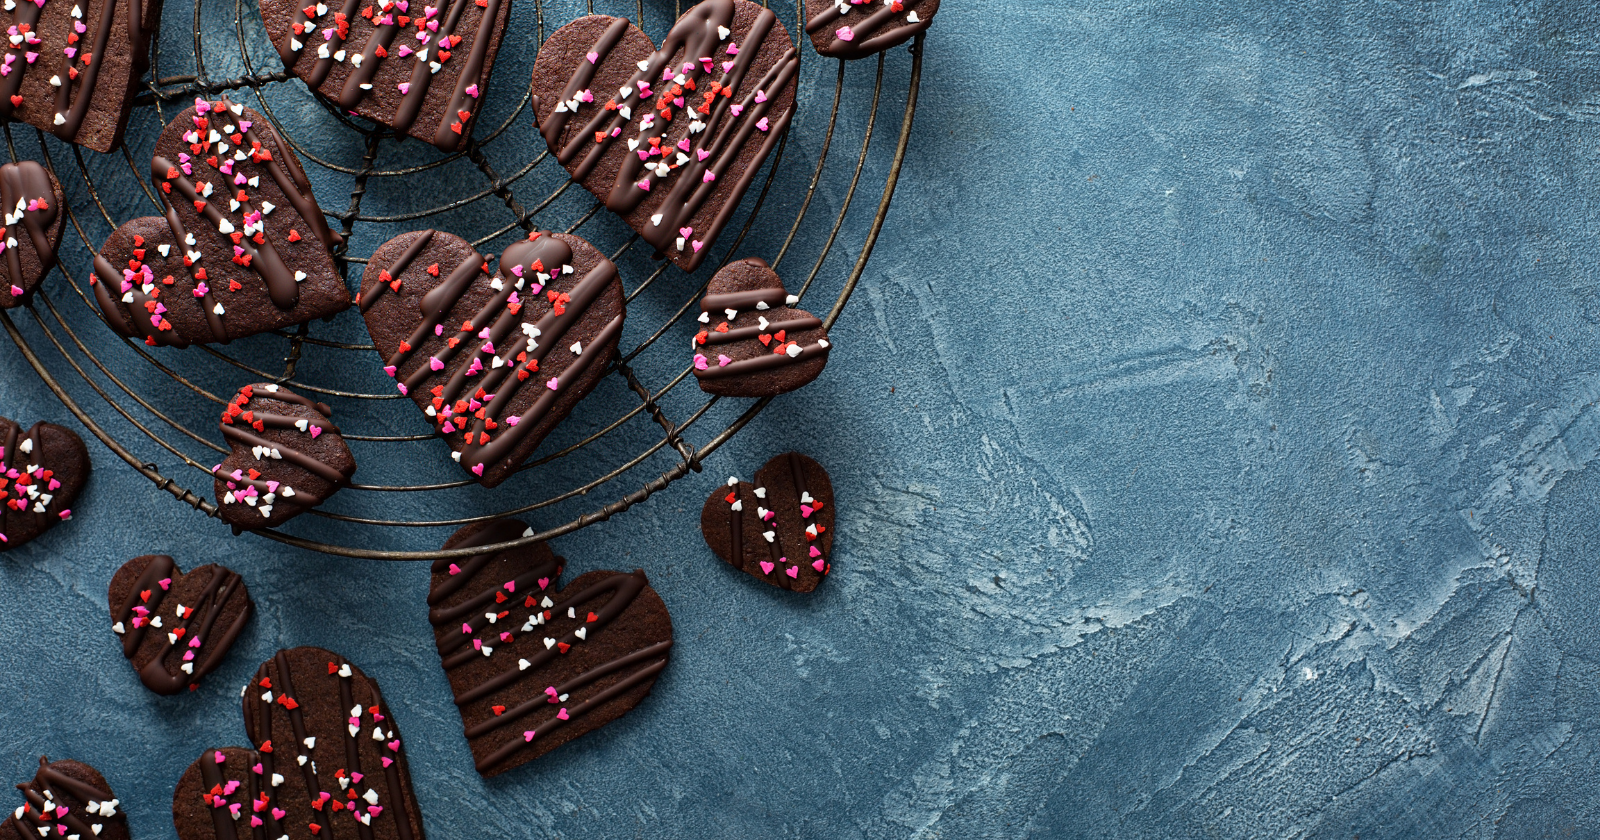 Valentine's Day: 5 vegan chocolate recipes to offer, share or devour yourself